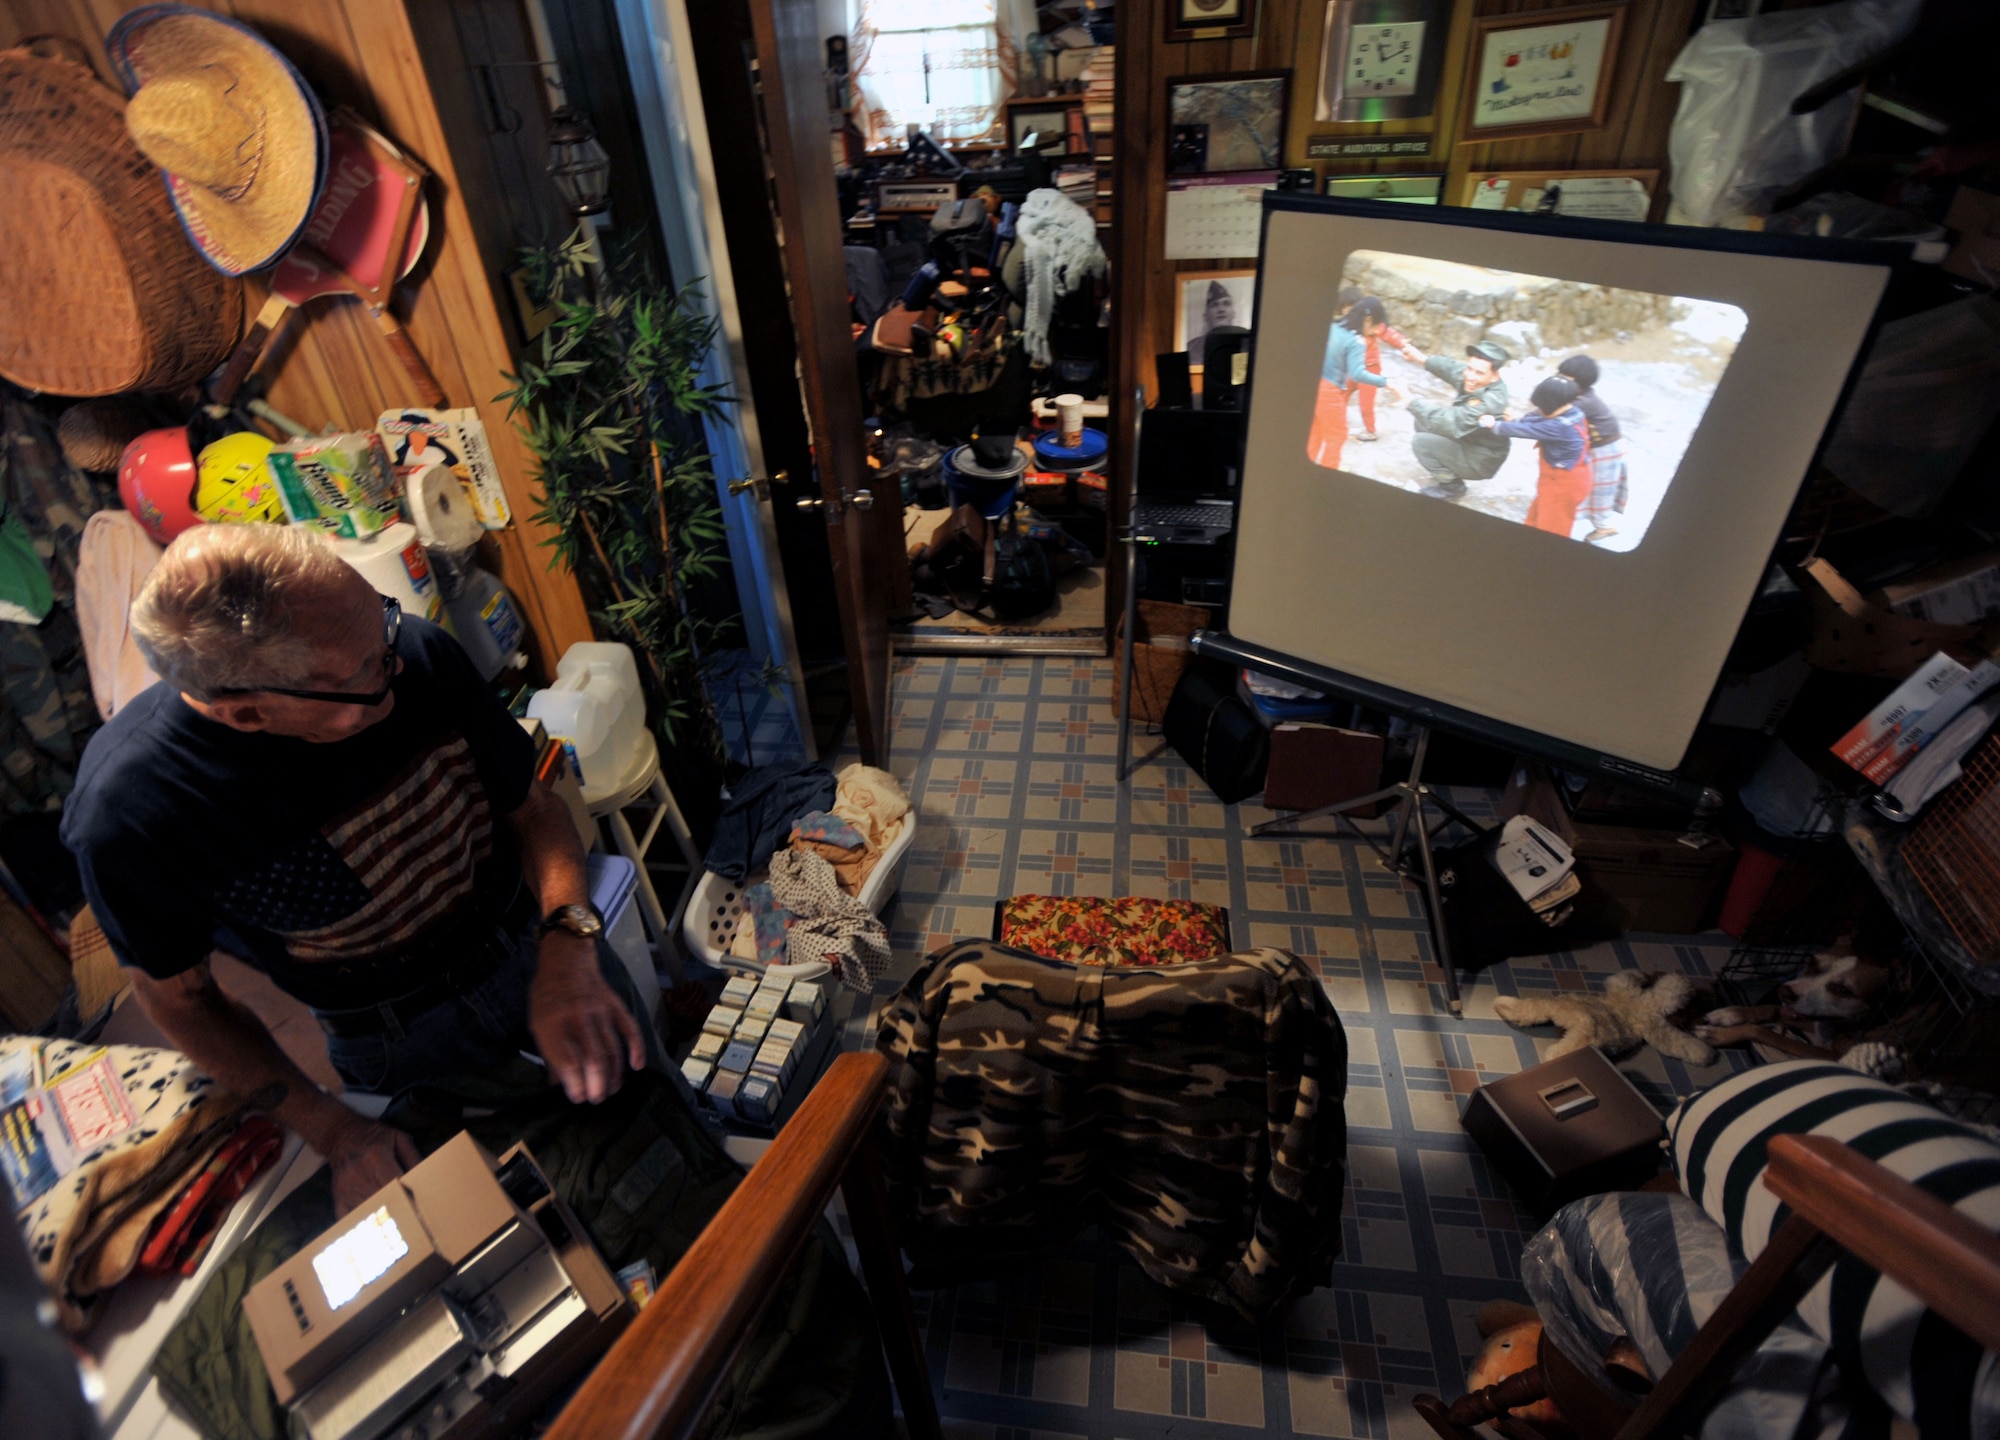 Retired U.S. Army Maj. E. Vernon Smith Jr. looks at slides from photos he took while stationed in South Korea at his home in central Virginia, July 20, 2013.  In support of the Korean Armistice Agreement signed July 27, 1953, Smith was assigned as the executive officer of the 24th Infantry Division Replacement Company, which later became the 1st Cavalry Division, and oversaw the logistics of coordinating replacement units. (U.S. Air Force photo by Staff Sgt. Katie Gar Ward/Released) 
